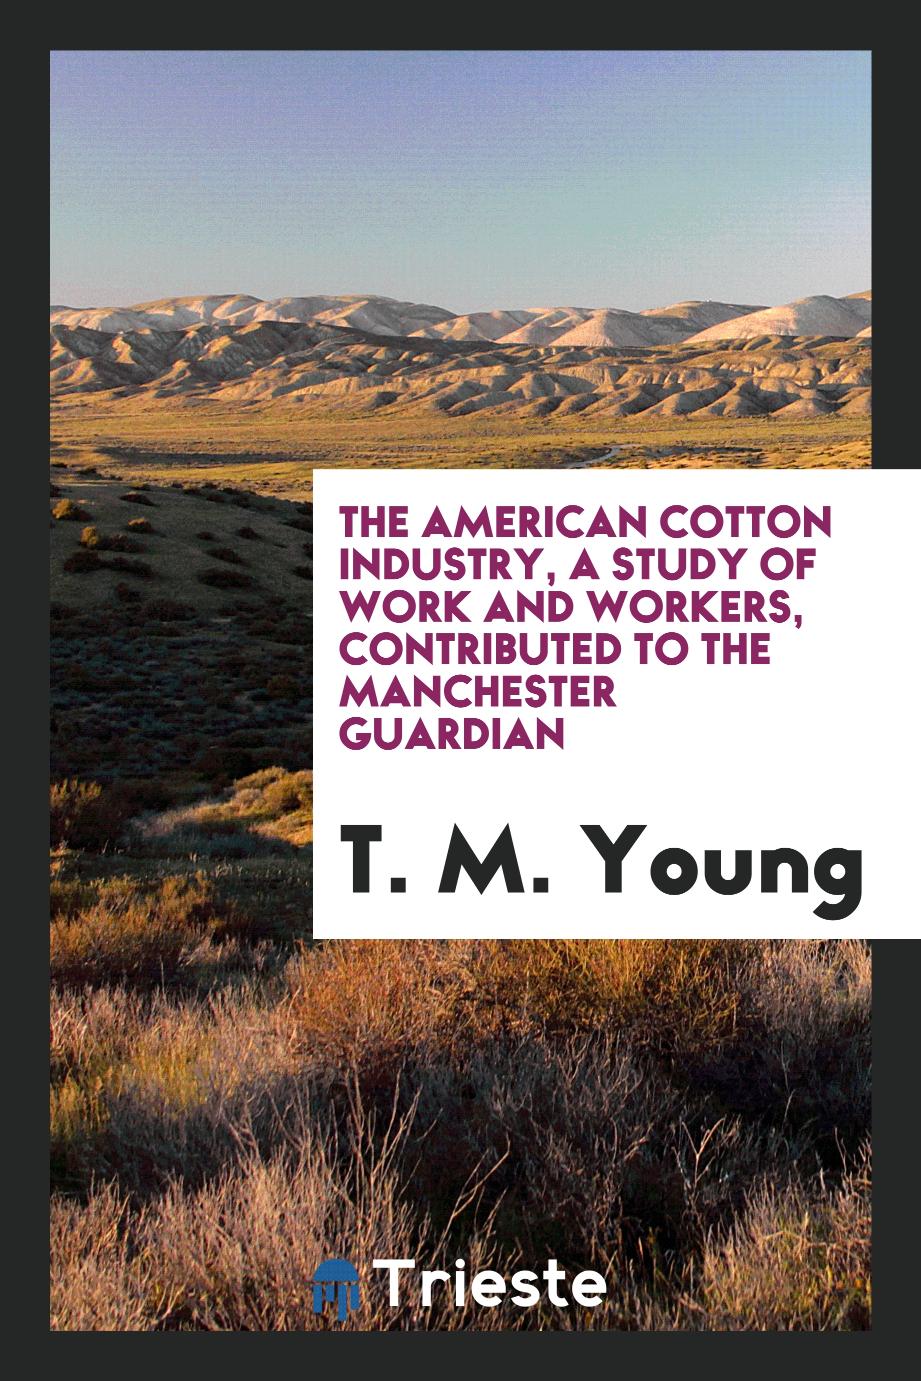 The American cotton industry, a study of work and workers, contributed to the Manchester Guardian